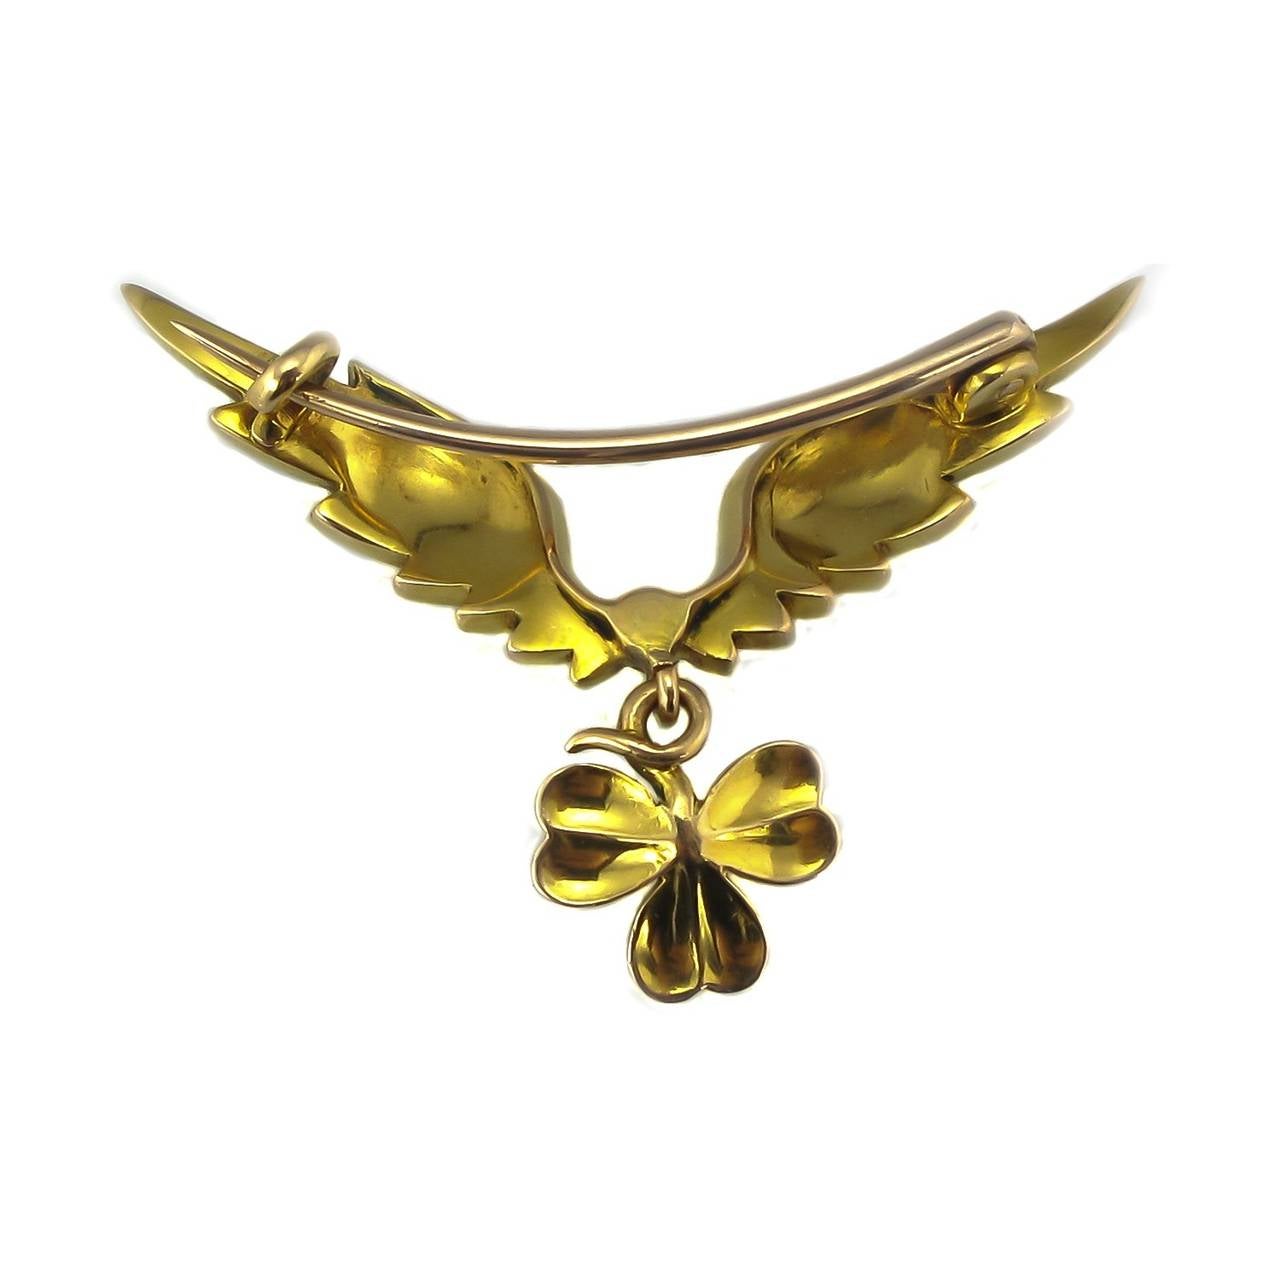 A beautiful 15ct gold brooch, circa 1910 - 1920s. Designed as green and white enamel angel wings with a green three leaf clover/shamrock enamelled droplet with pearl accents. Tests as 15ct gold.

Measurements: 4cm x 2cm.

The shamrock has been